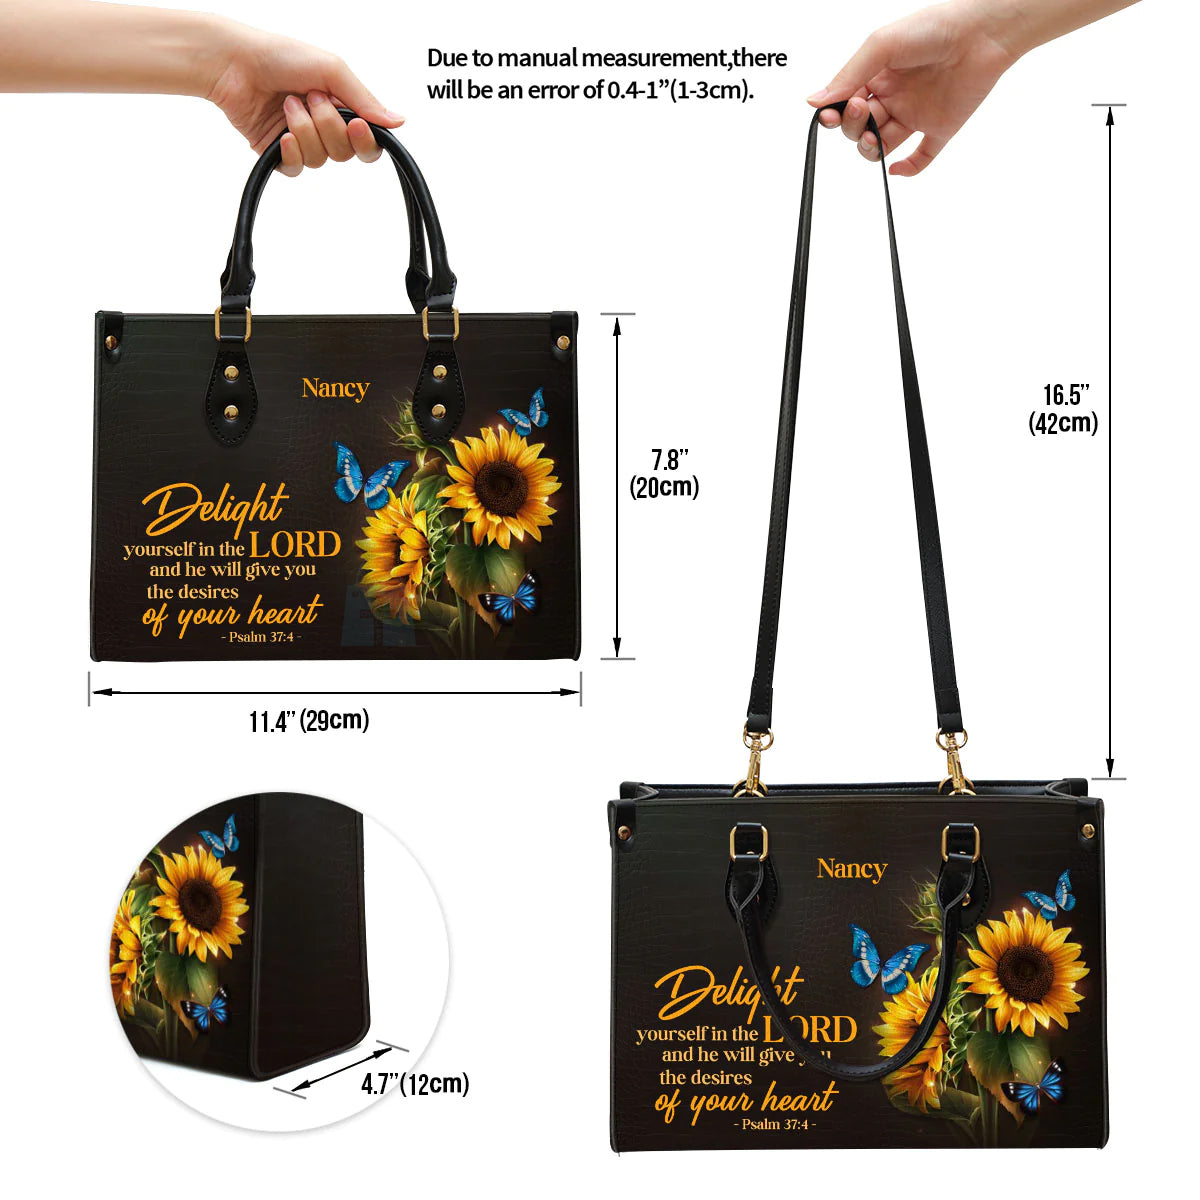 Christianart Designer Handbags, Delight Yourself In The Lord, Personalized Gifts, Gifts for Women. - Christian Art Bag